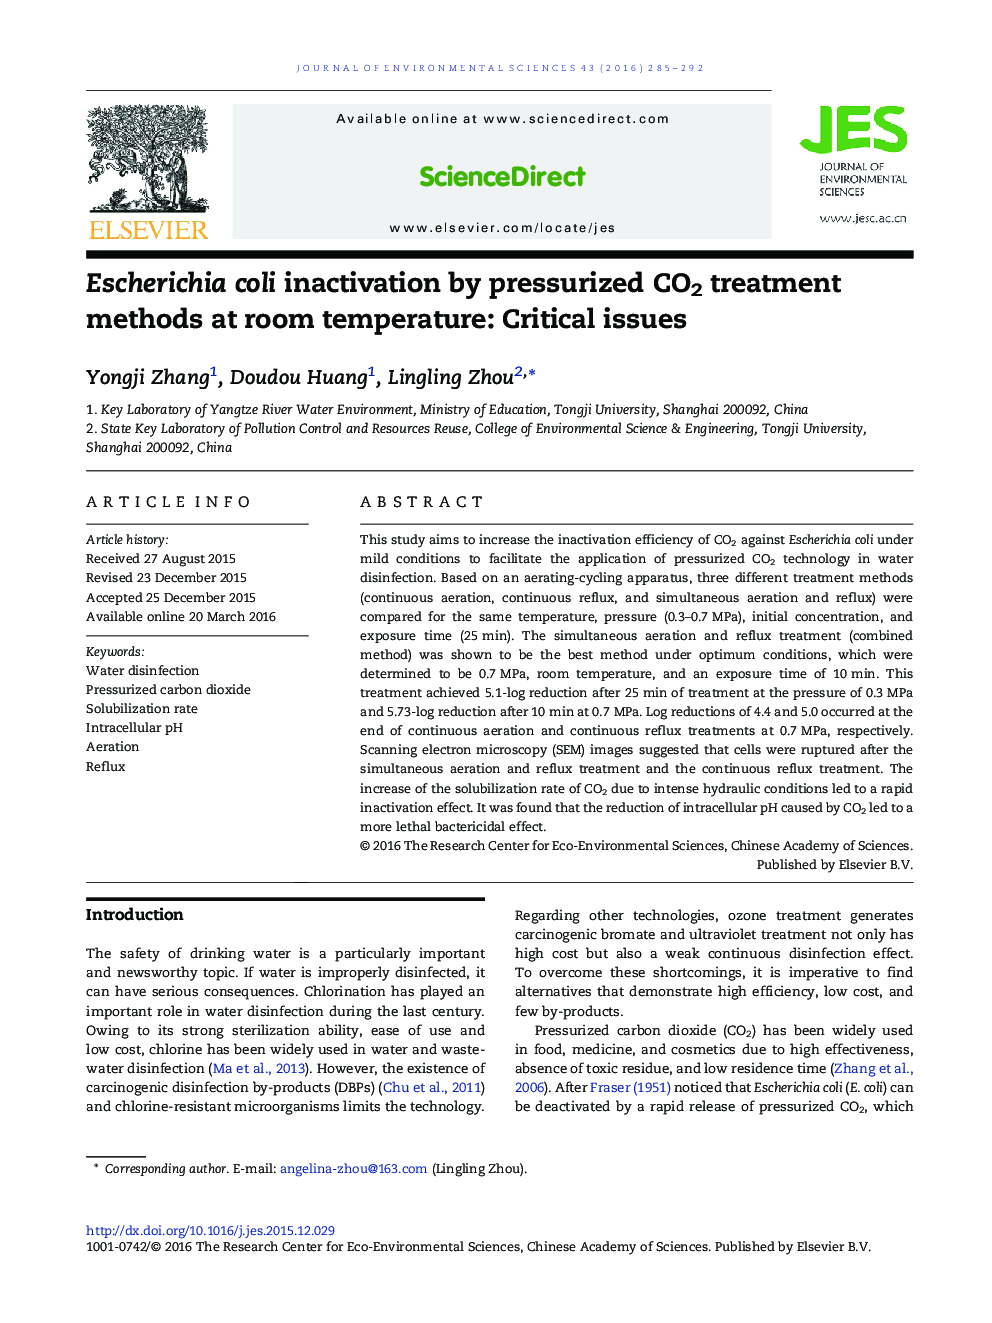 Escherichia coli inactivation by pressurized CO2 treatment methods at room temperature: Critical issues